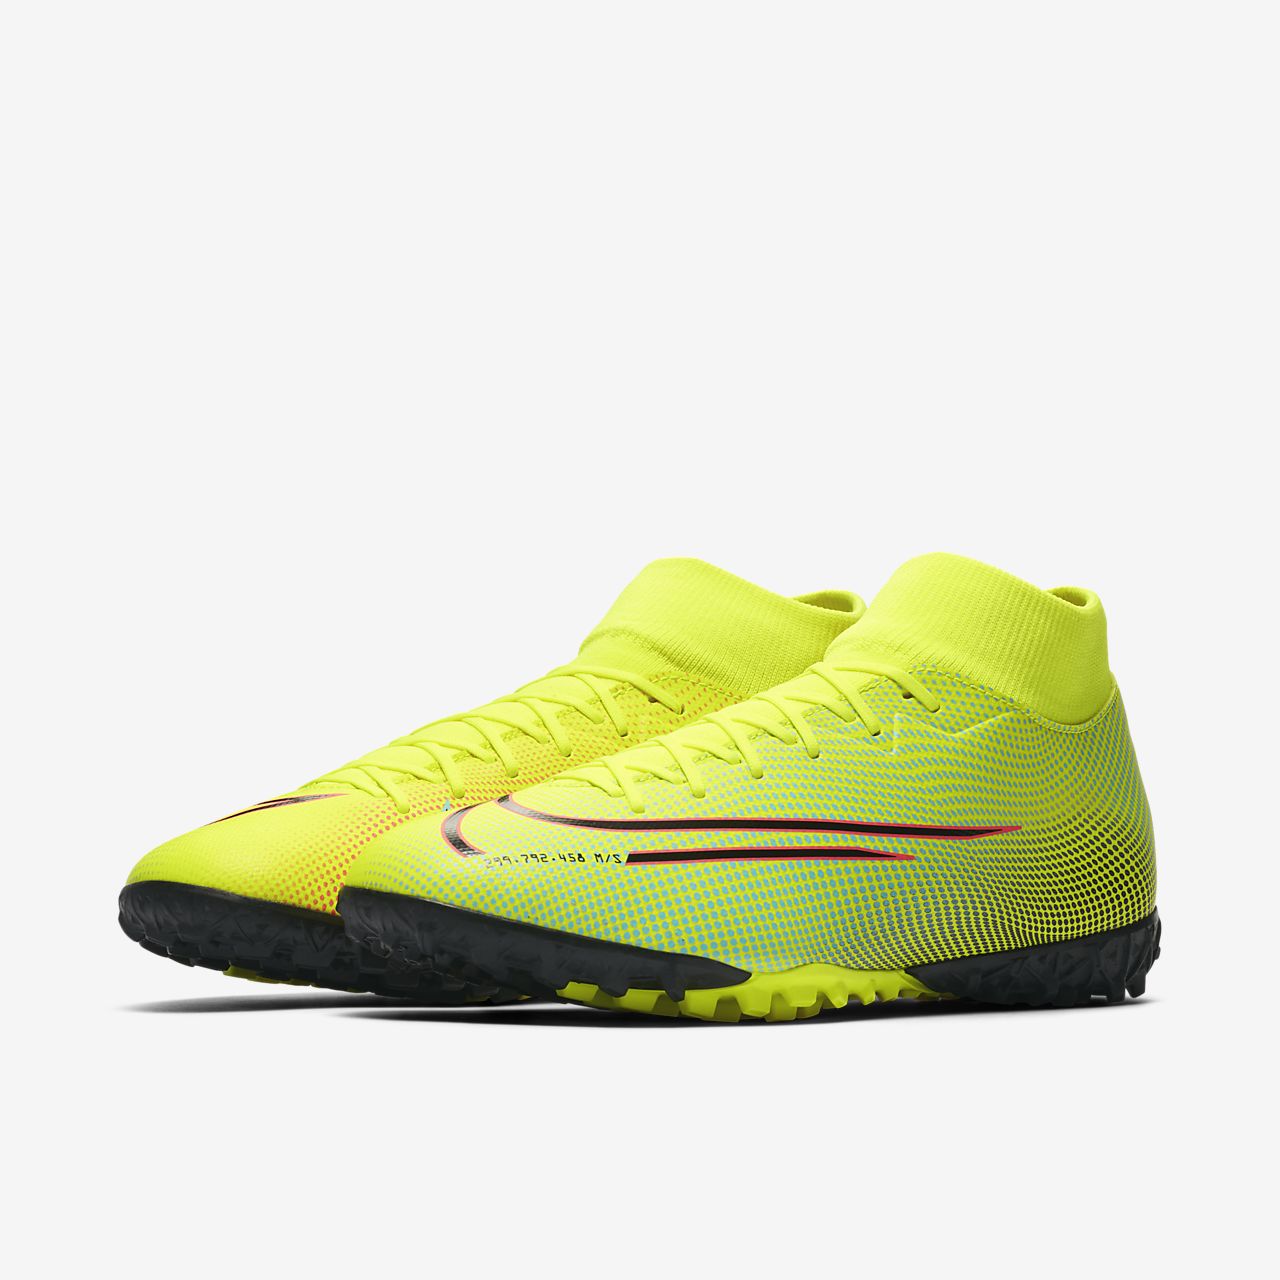 Nike Mercurial Superfly 7 Academy FG MG for men now.